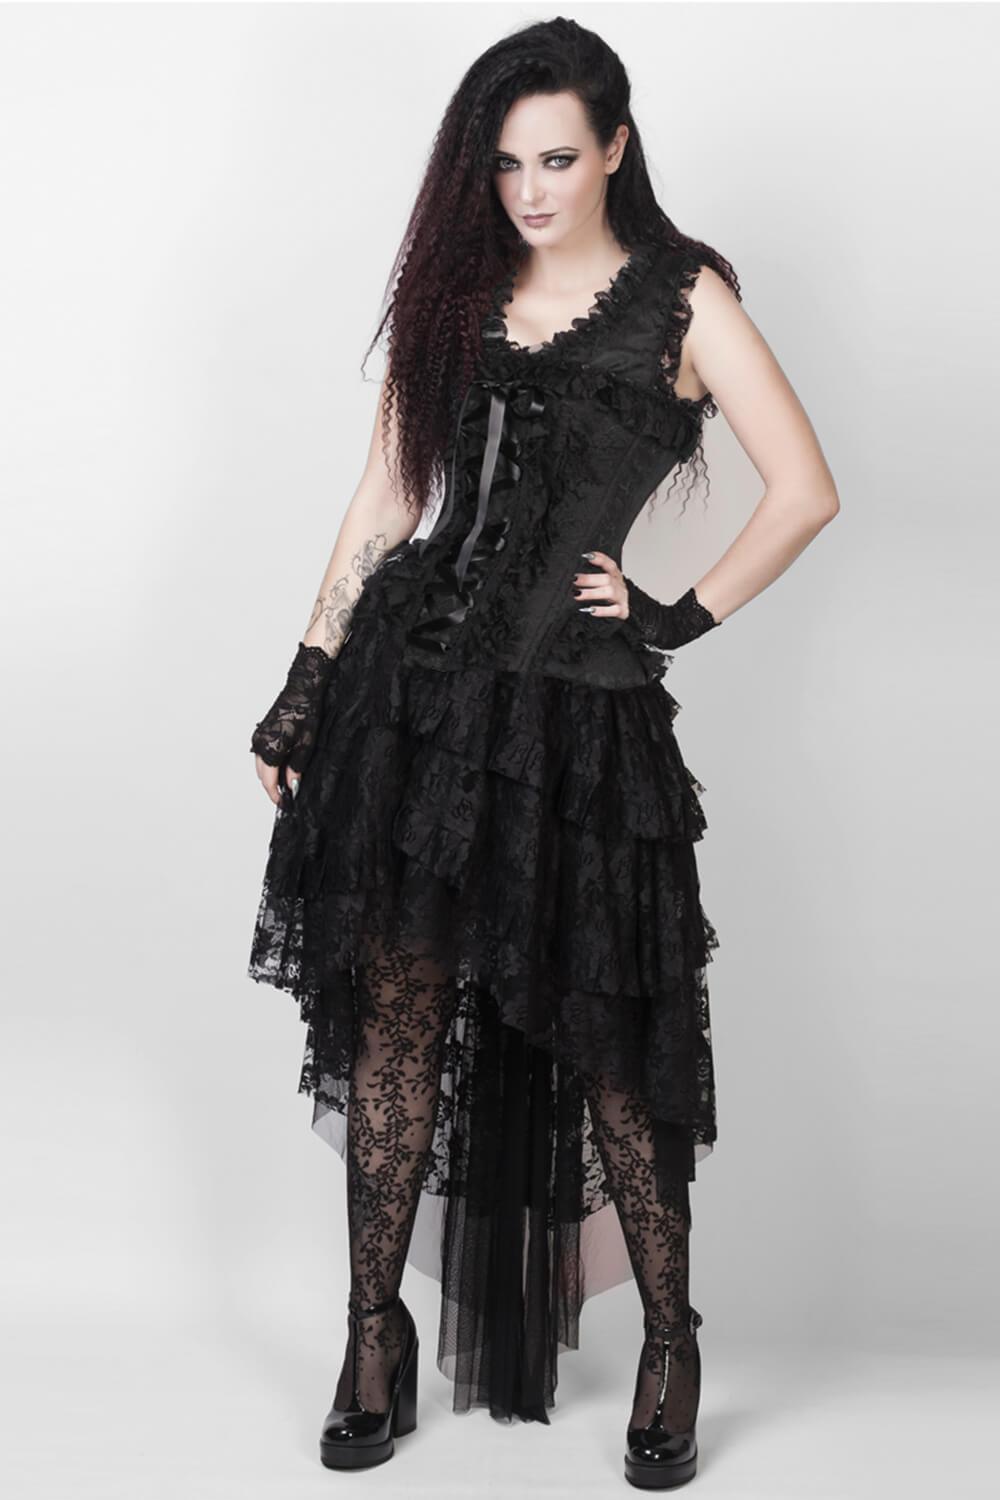 Corset Dress Black Lace and Brocade With High-Lo skirt